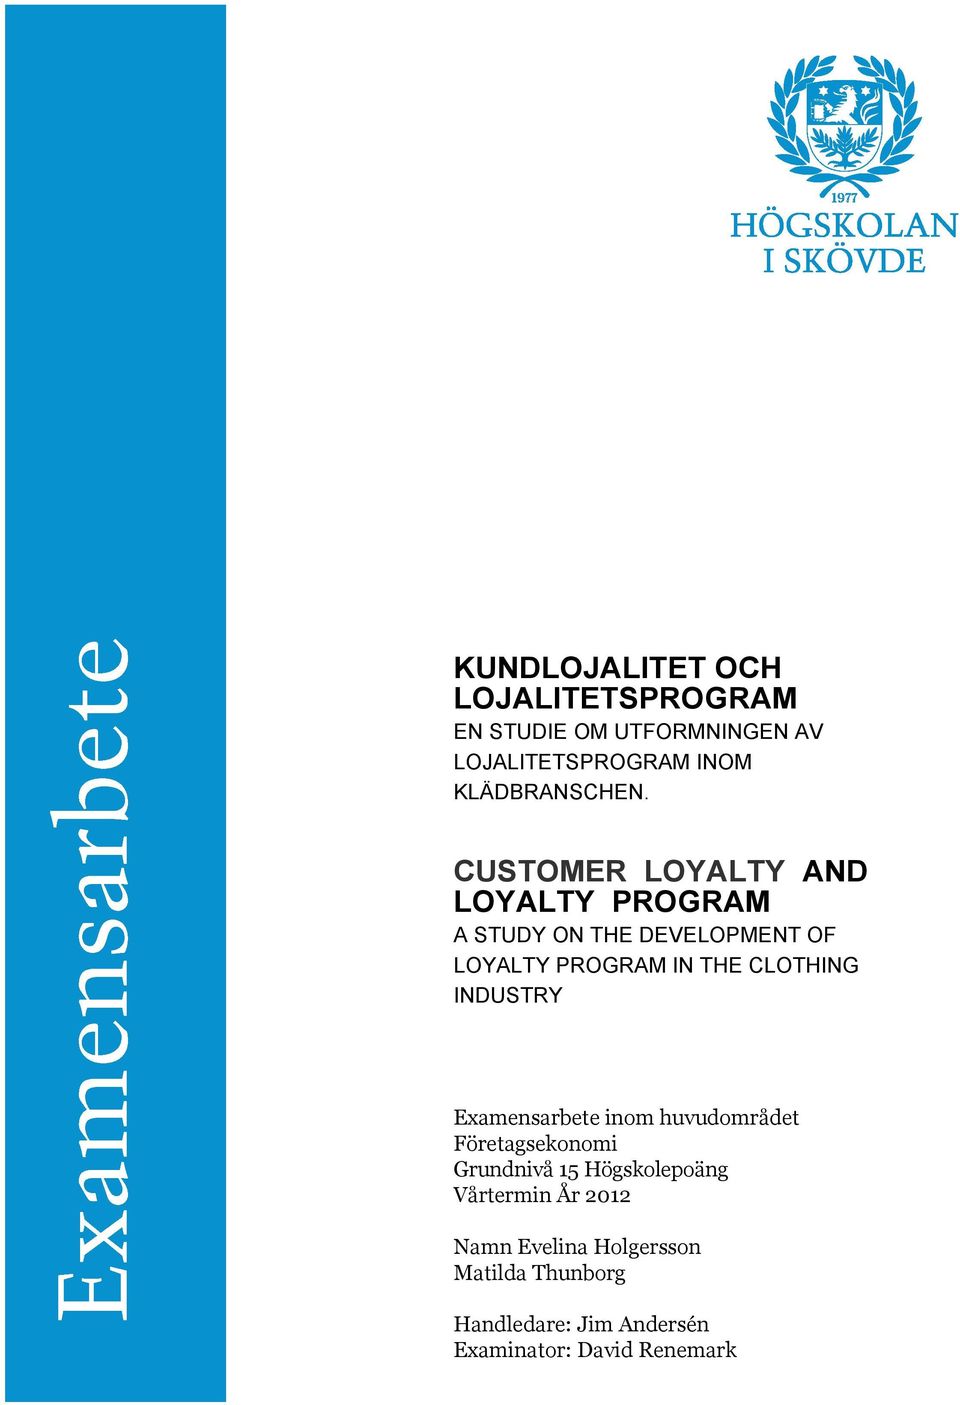 CUSTOMER LOYALTY AND LOYALTY PROGRAM A STUDY ON THE DEVELOPMENT OF LOYALTY PROGRAM IN THE CLOTHING